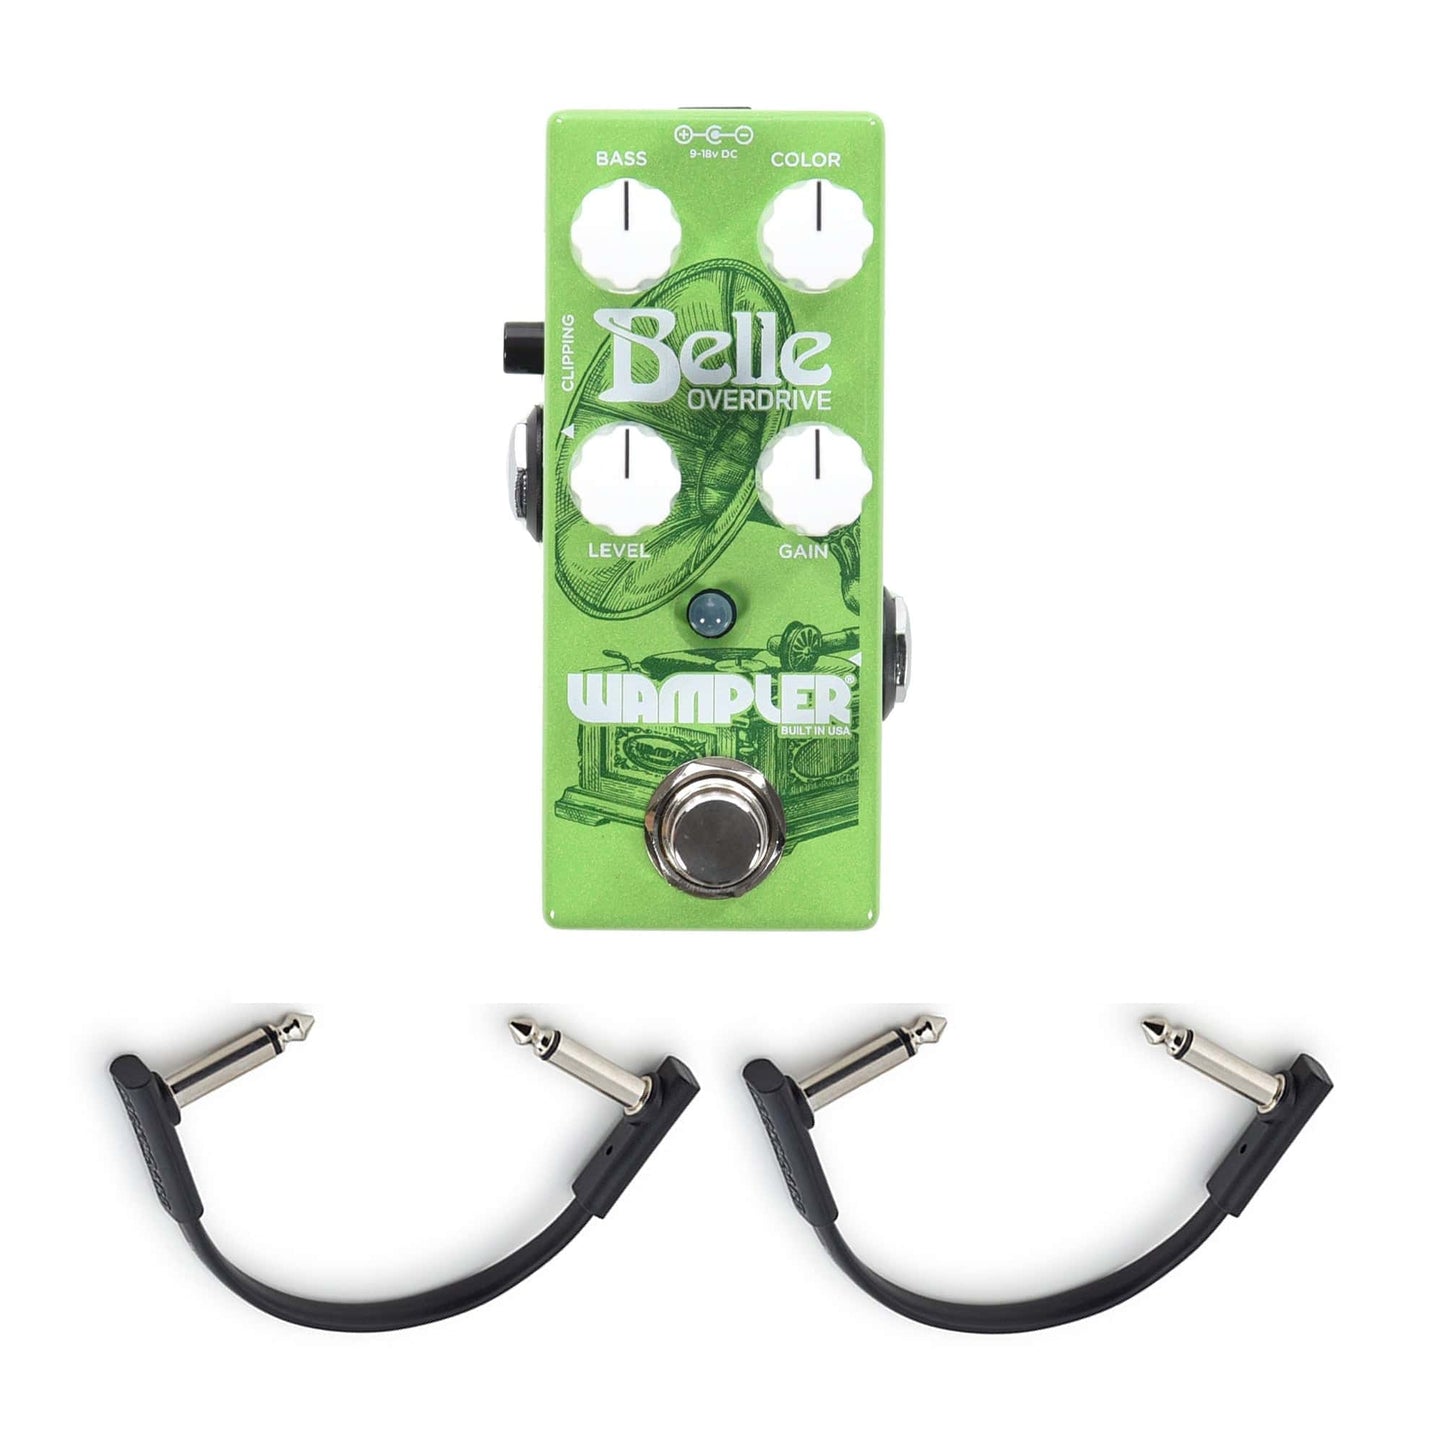 Wampler Belle Transparent Overdrive Pedal w/(2) Rockboard Flat Patch Cables Bundle Effects and Pedals / Overdrive and Boost